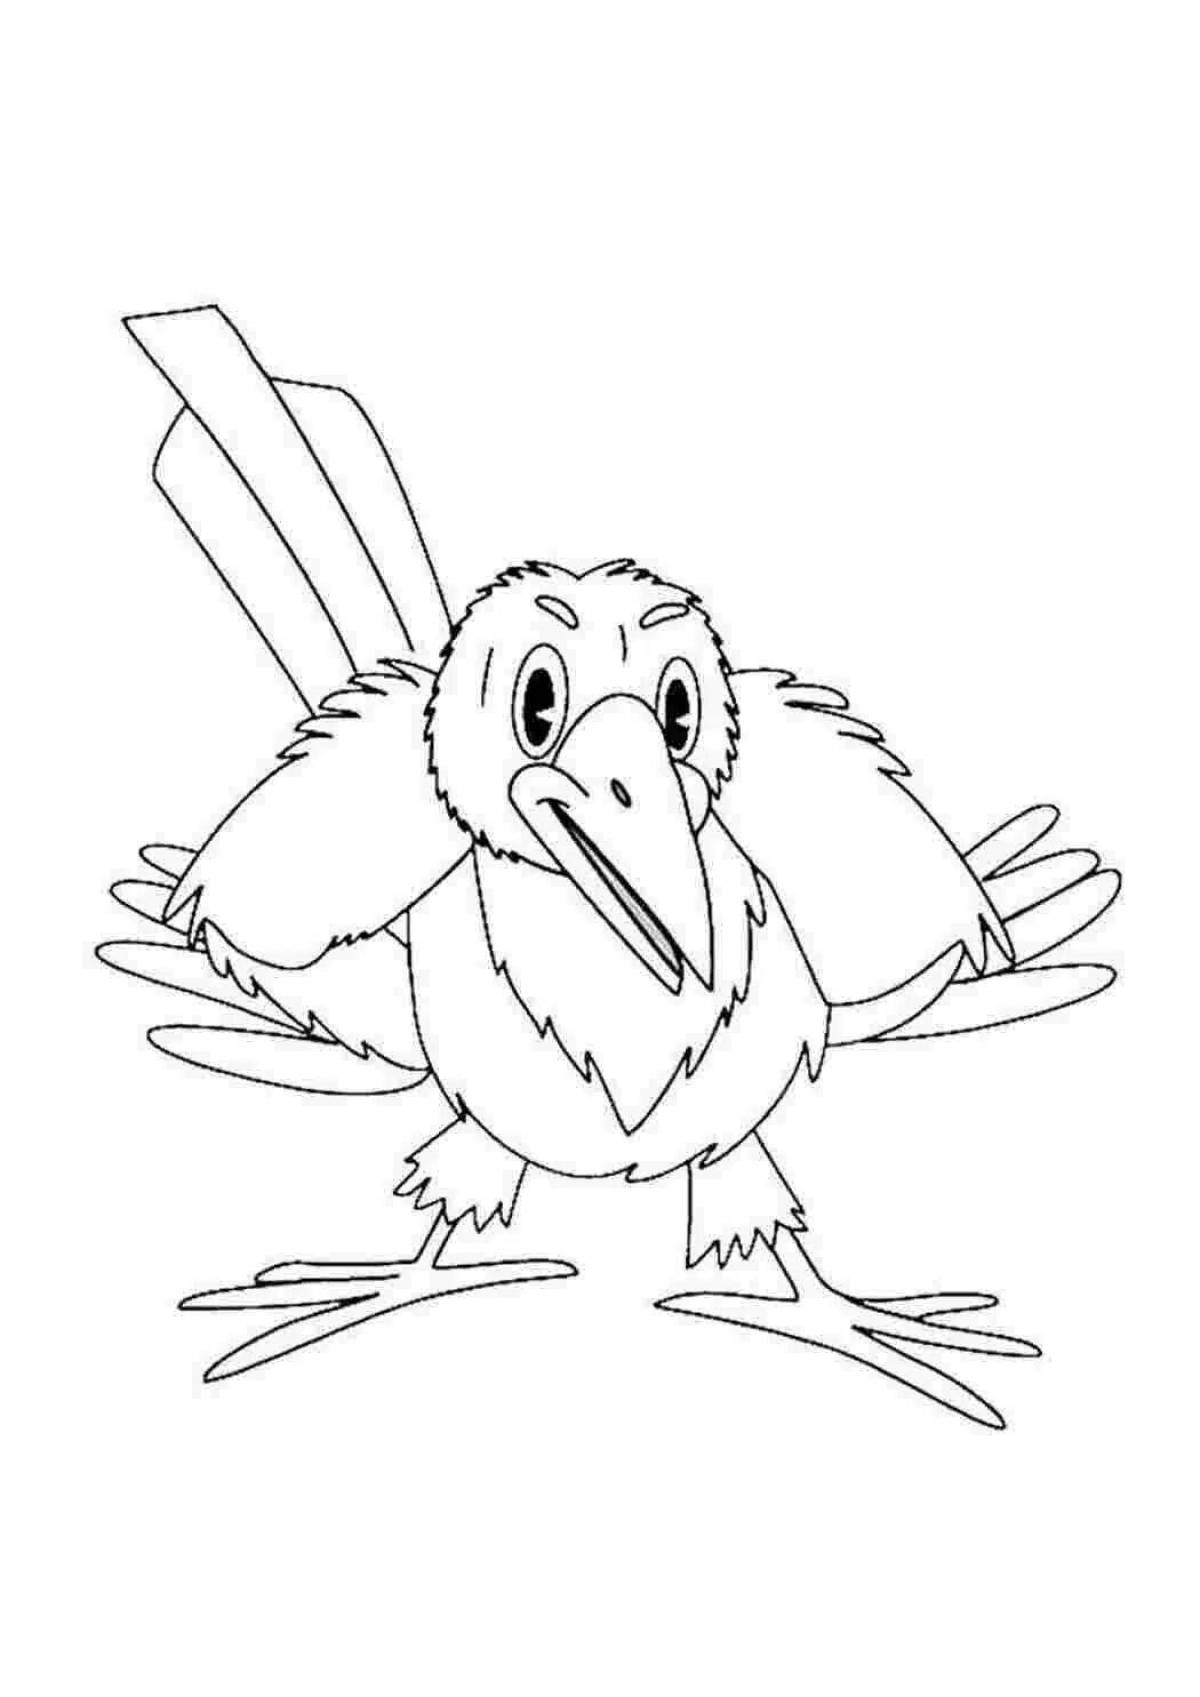 Coloring page charming disheveled sparrow